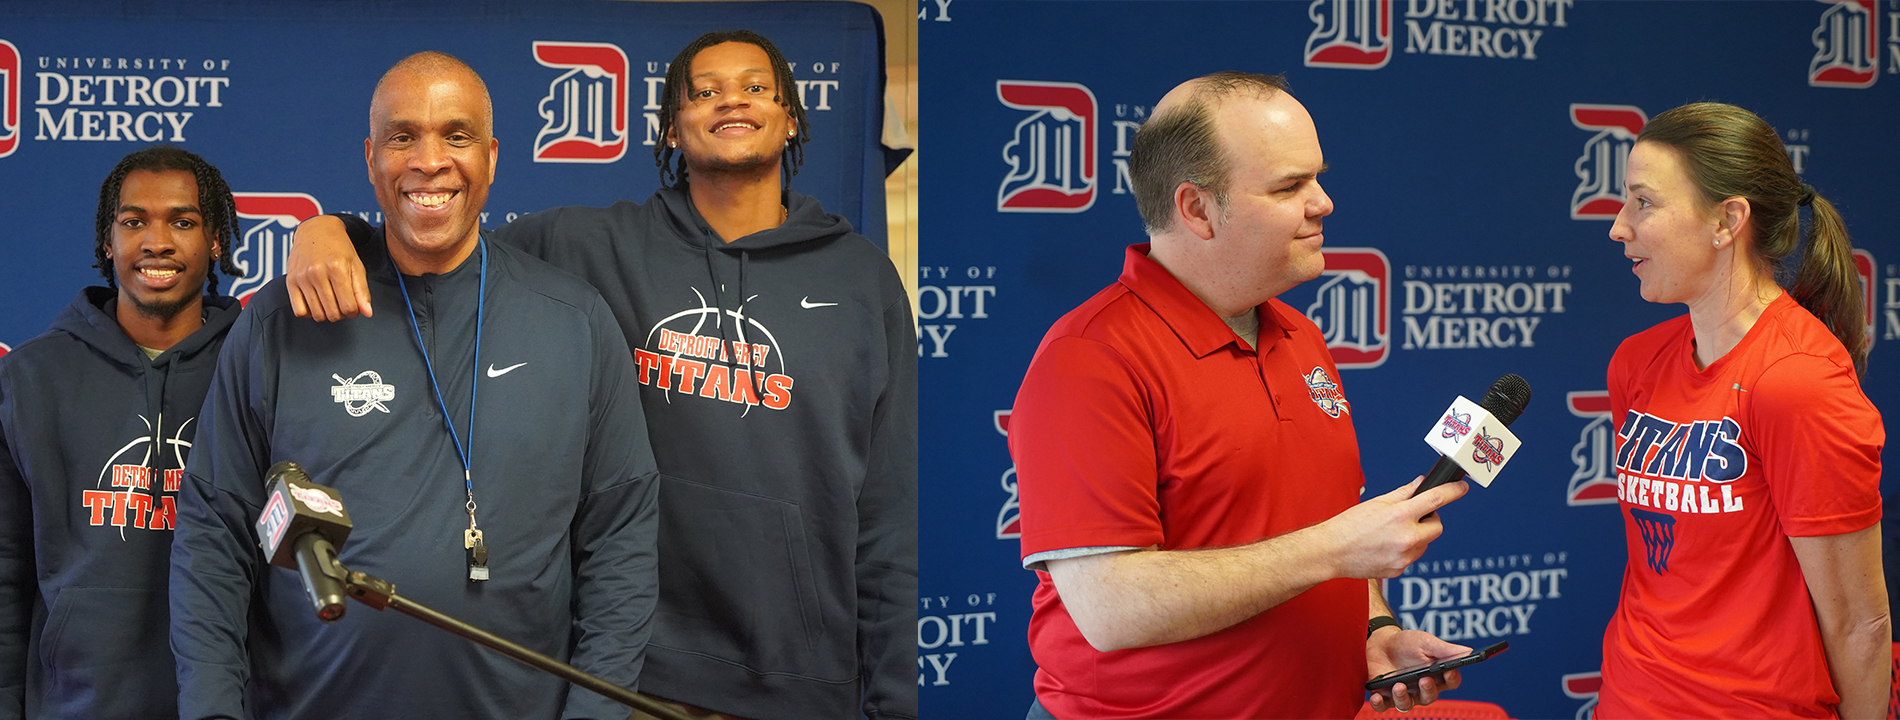 Five people standing indoors, three on the left smiling for the camera and one interviewing the other in the photo on the right. Some members are wearing Detroit Mercy basketball apparel and a big blue University of Detroit Mercy backdrop is behind them in both photos.